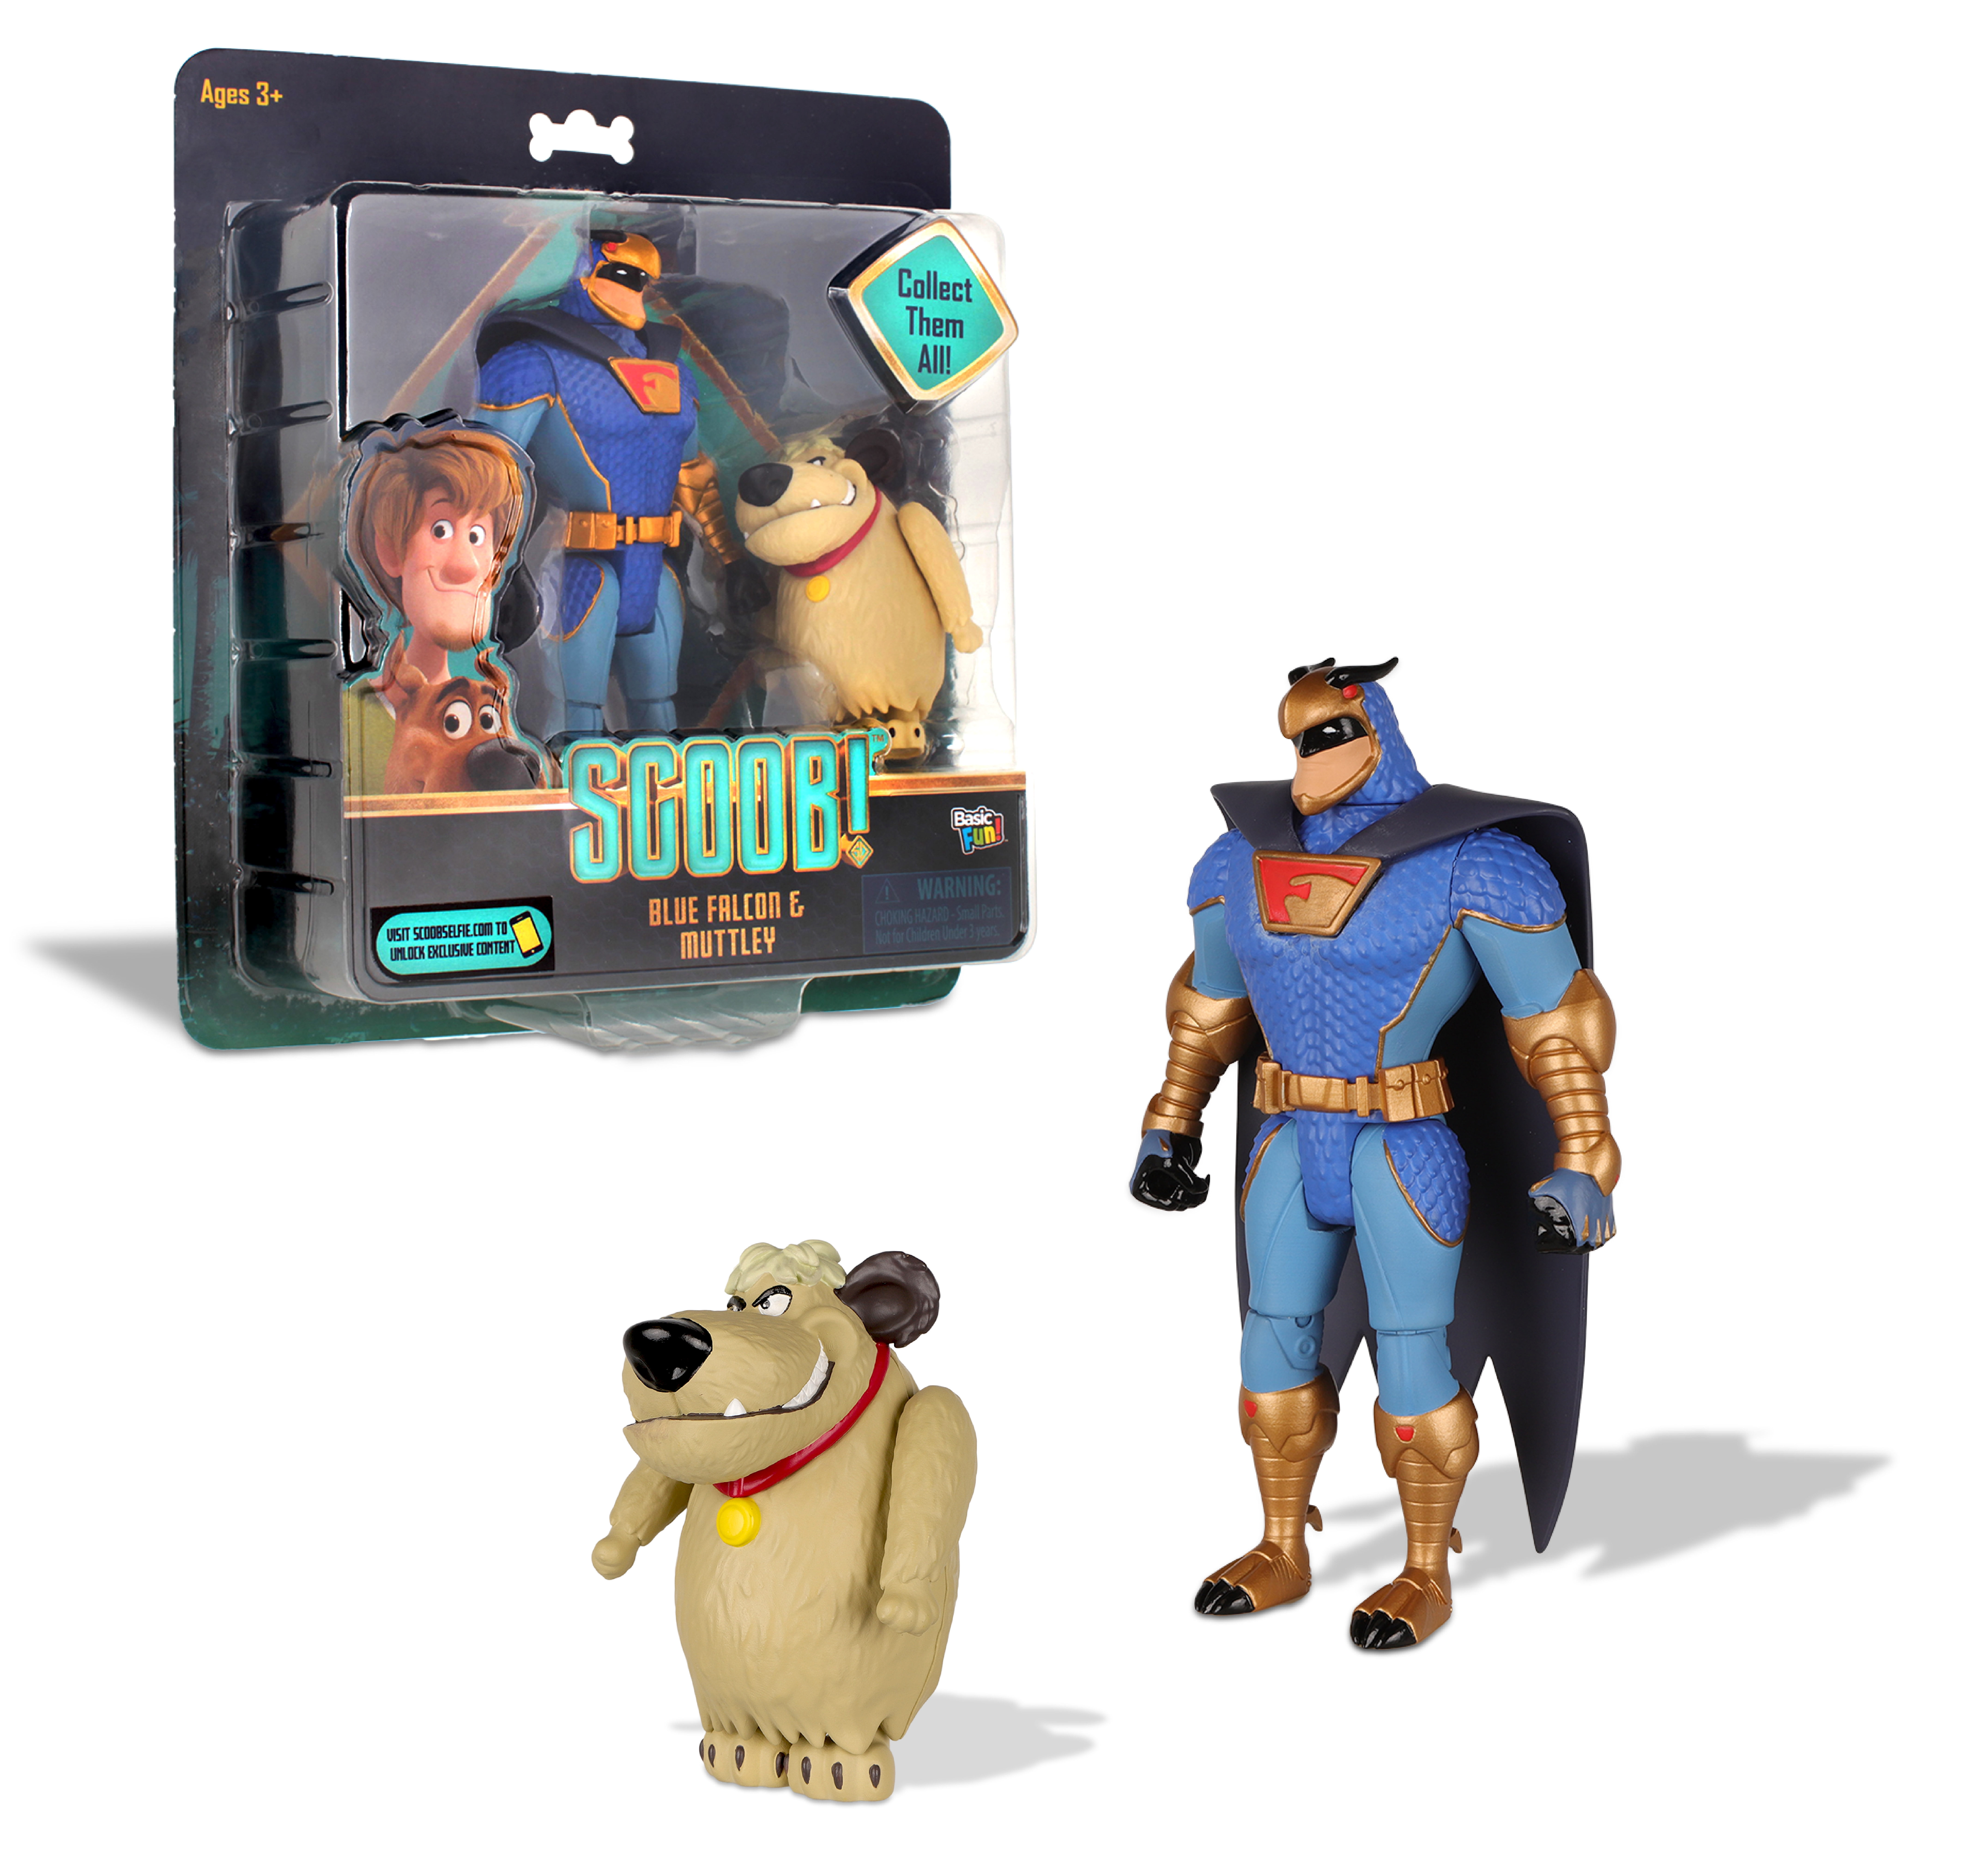 Scoob Shaggy & Dynomutt Scooby Doo Movie 2020 Action Figure Same-day Ship for sale online 